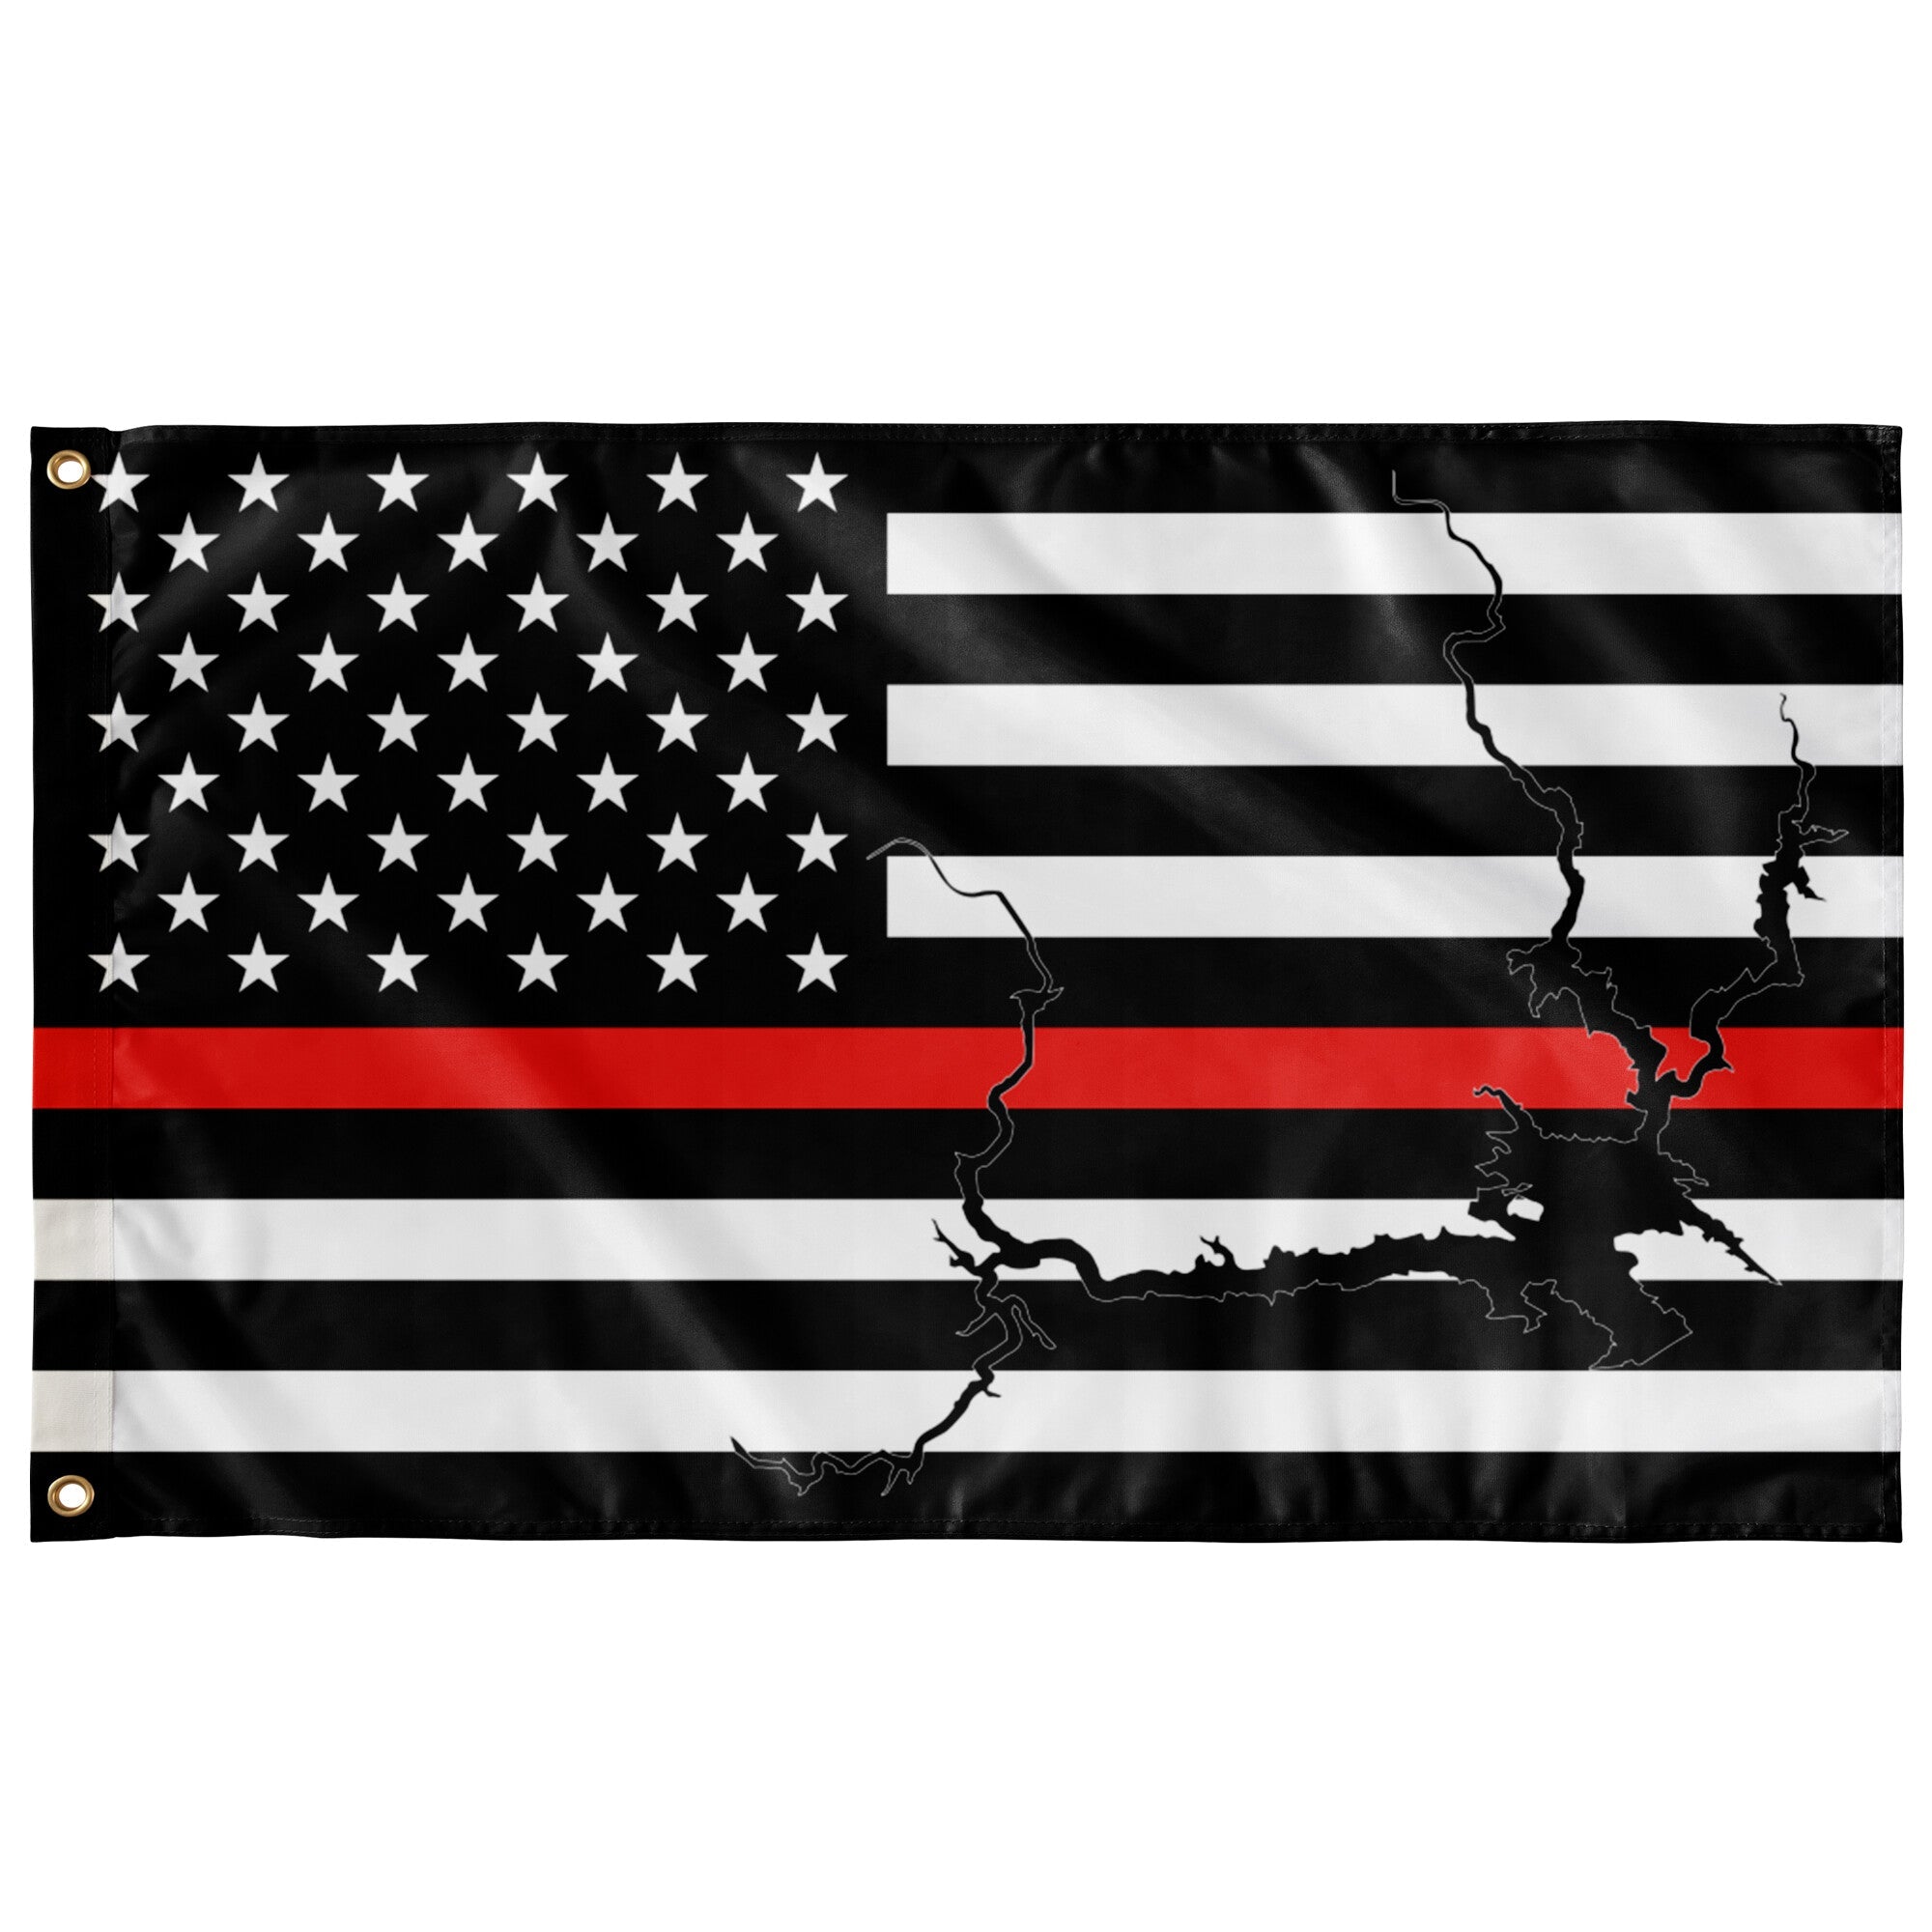 Lake Oroville Thin Red Line American Boat Flag Wall Art 